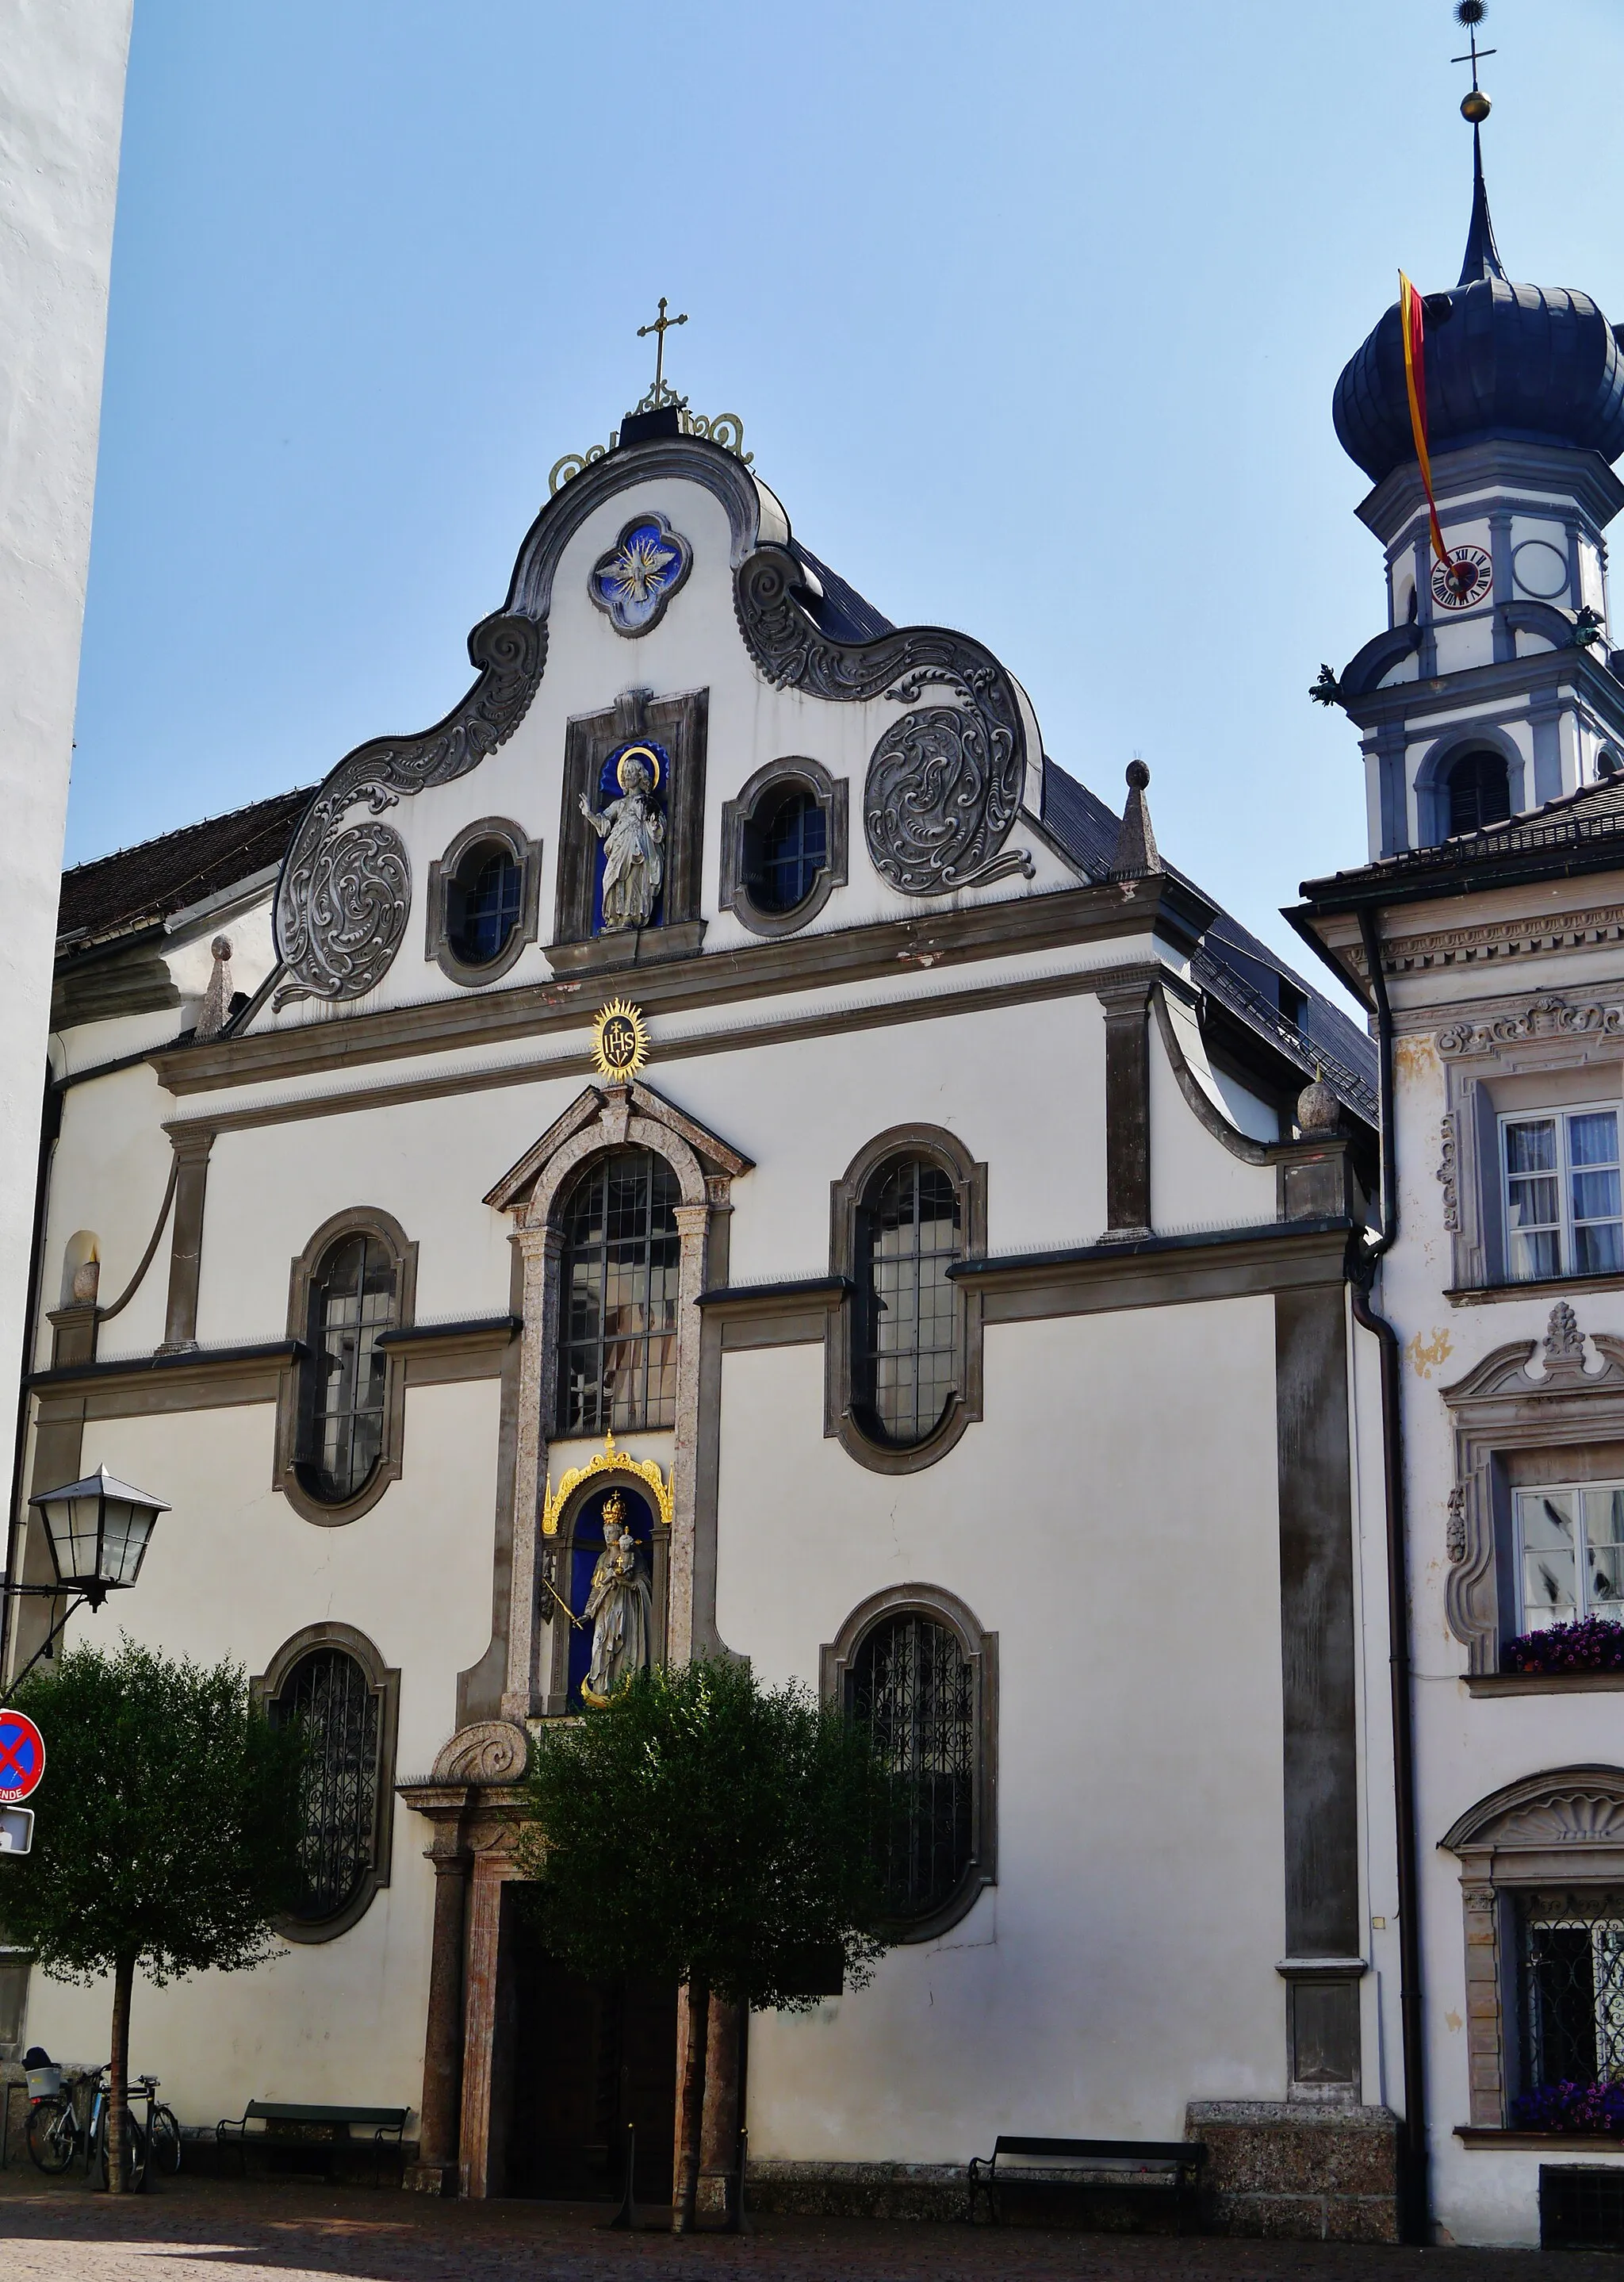 Photo showing: Facade of the Jesuit Church of All Saints, Hall in Tirol, Tyrol, Austria